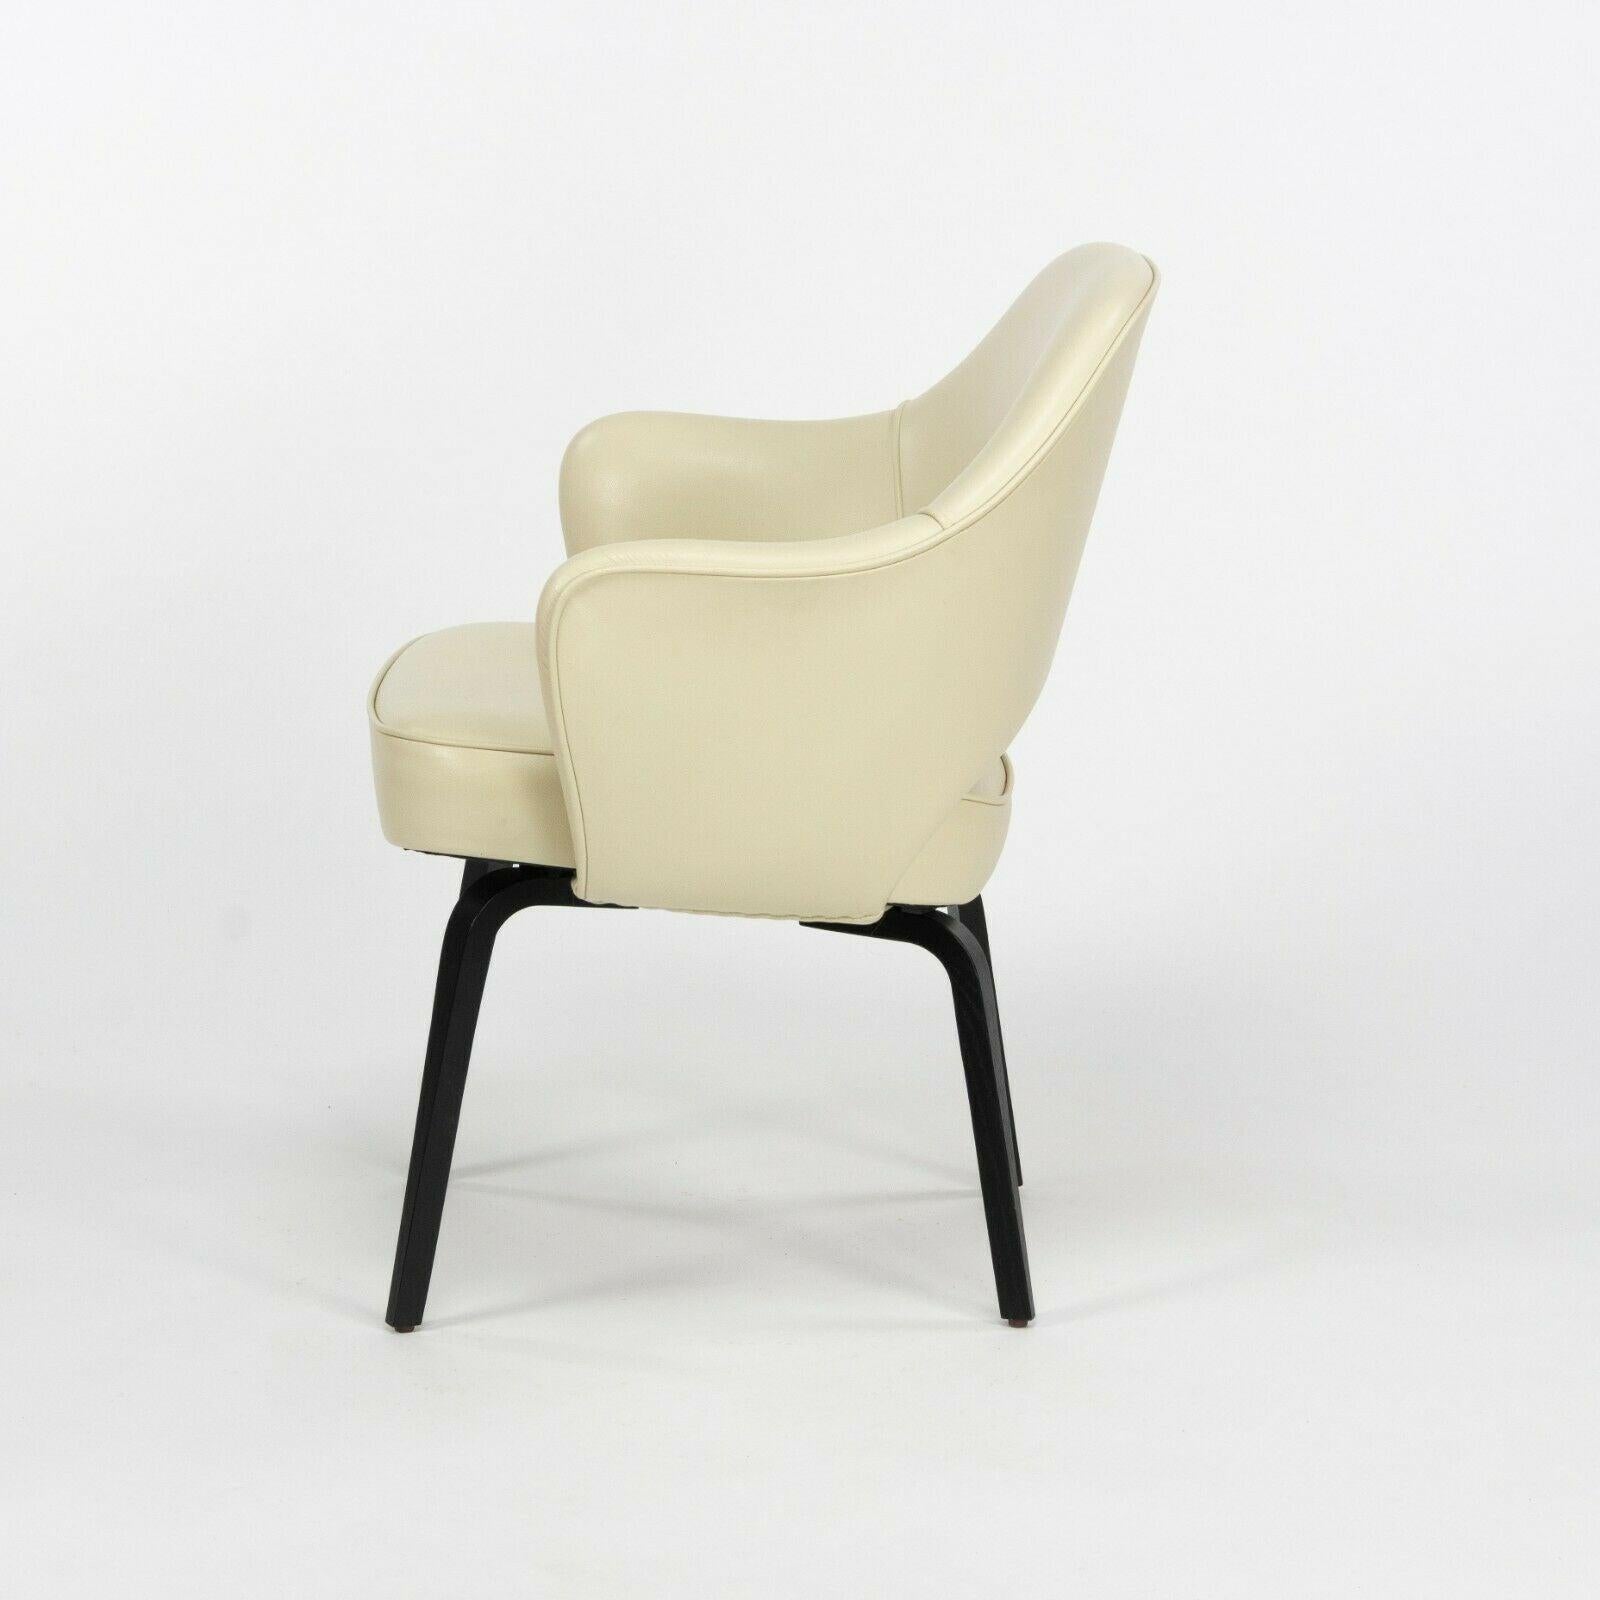 Eero Saarinen for Knoll 2020 Executive Armchair with Ivory Leather & Wood Legs For Sale 2